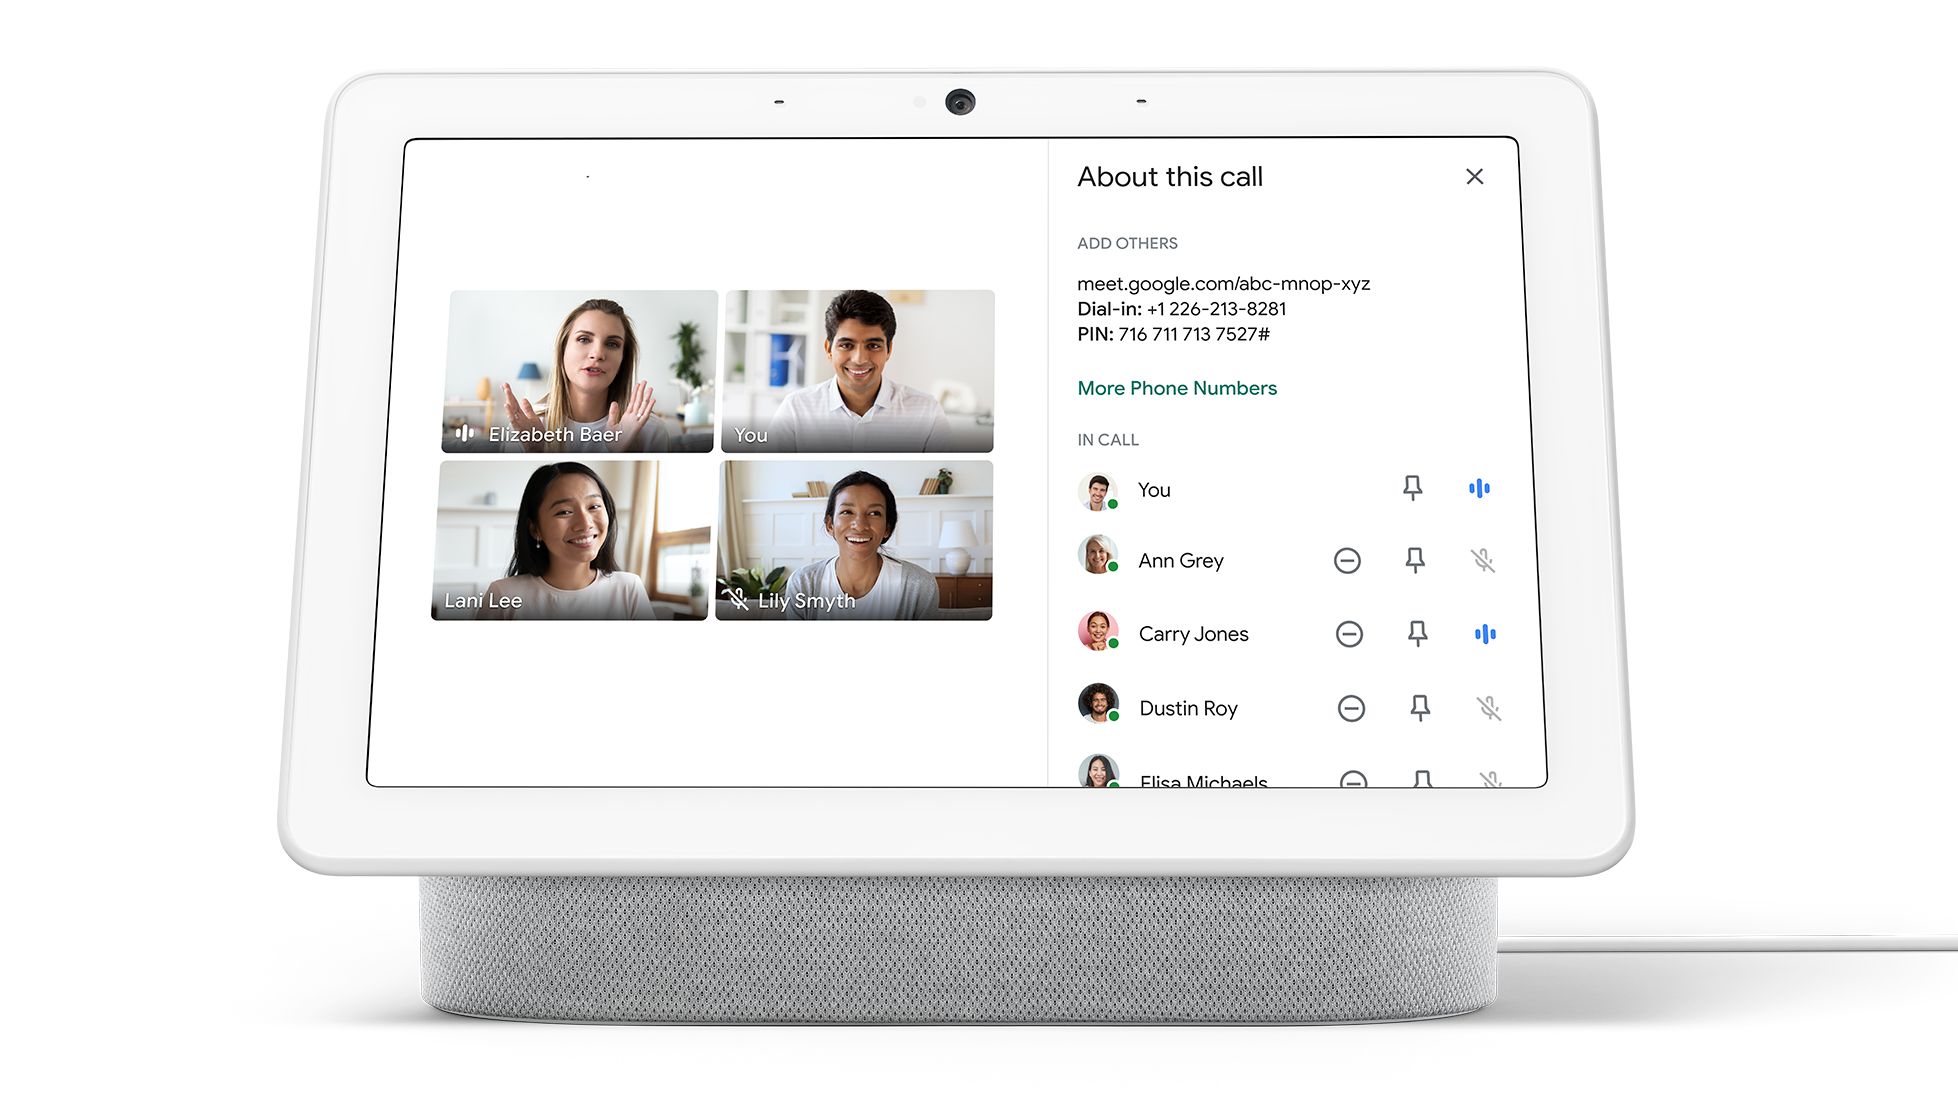 Google Workspace Updates Improved Google Meet Experience On The Nest Hub Max